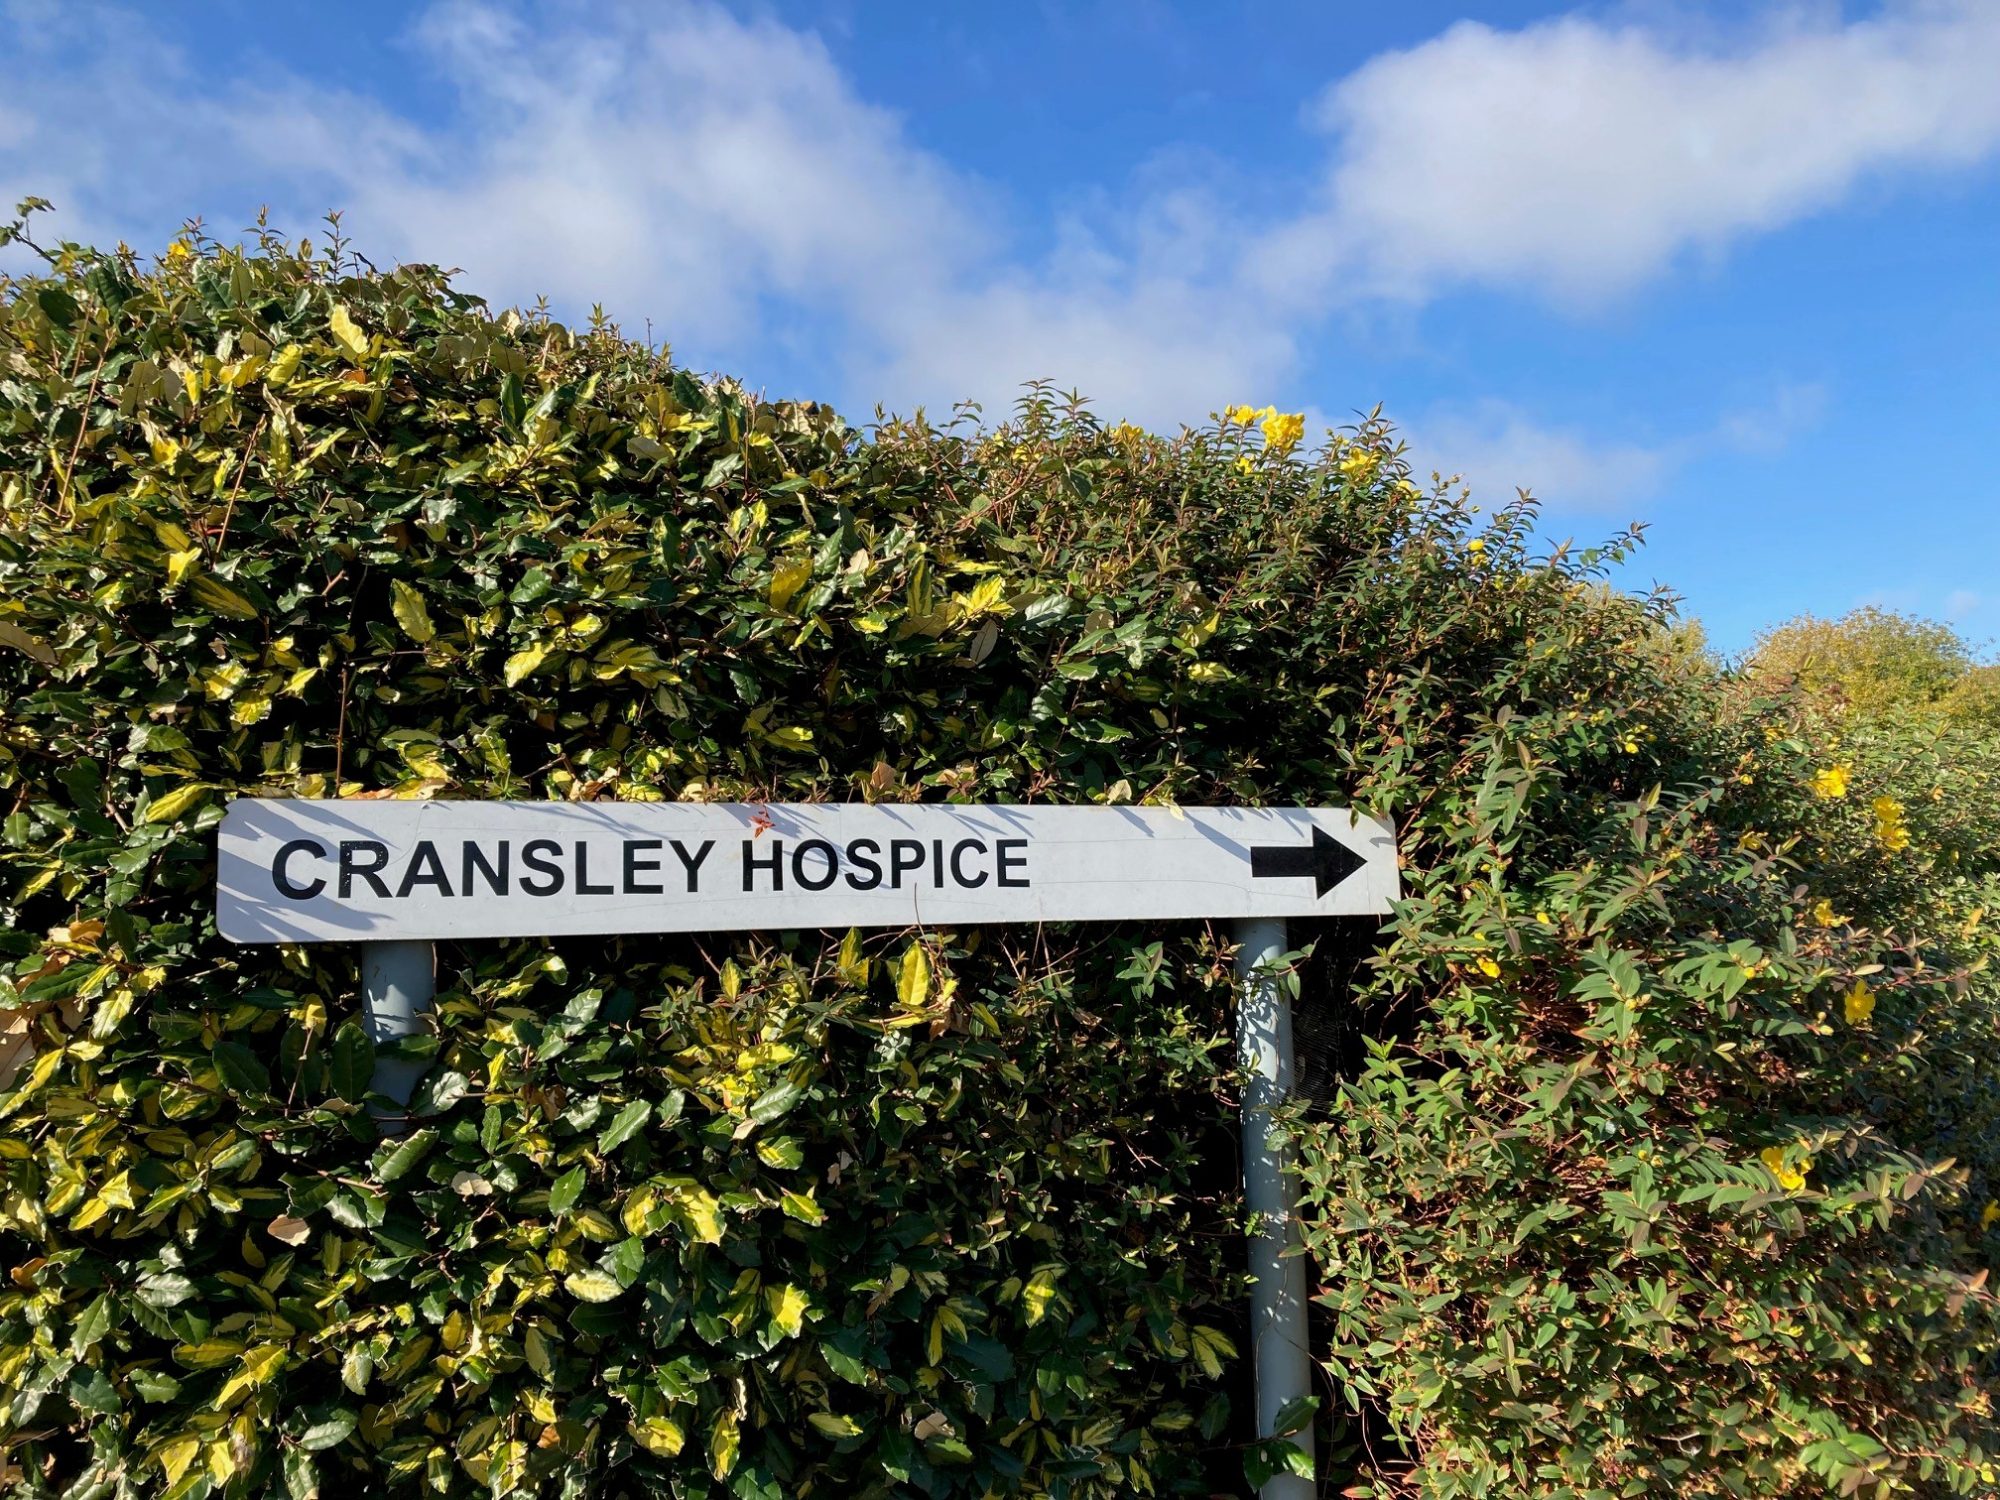 Road sign of Cransley Hospice against a background of a green hedge and sunshine